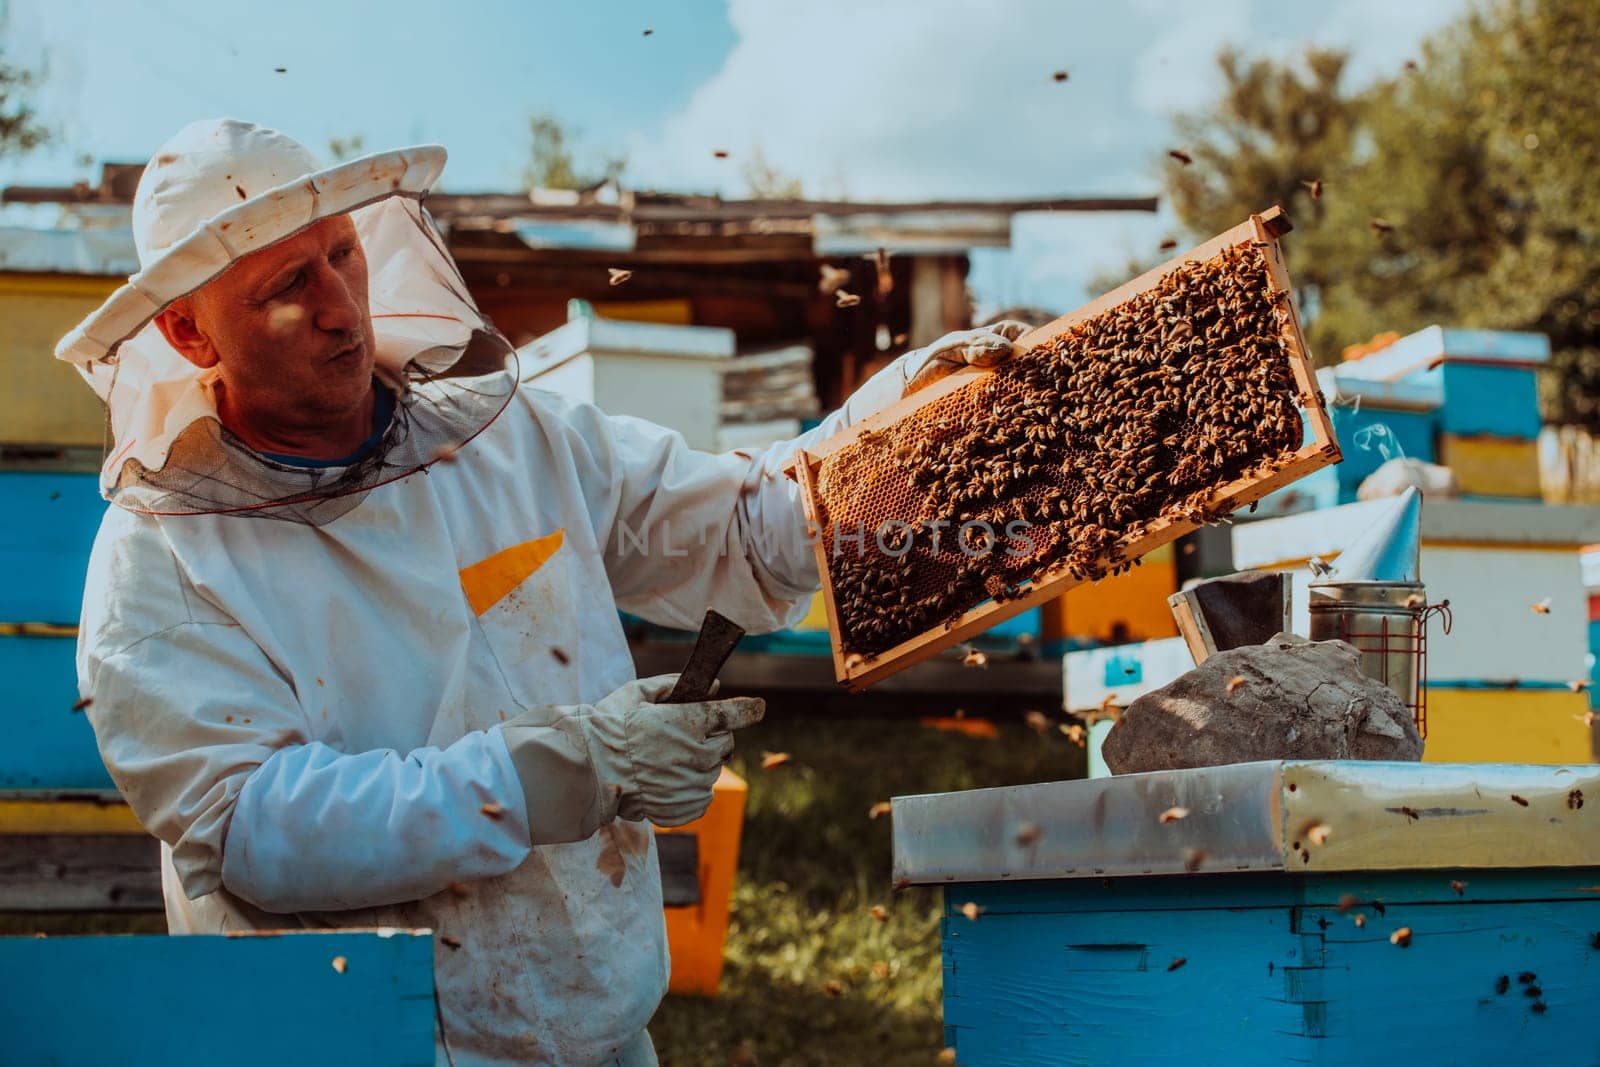 Beekeeper checking honey on the beehive frame in the field. Beekeeper on apiary. Beekeeper is working with bees and beehives on the apiary. Small business concept